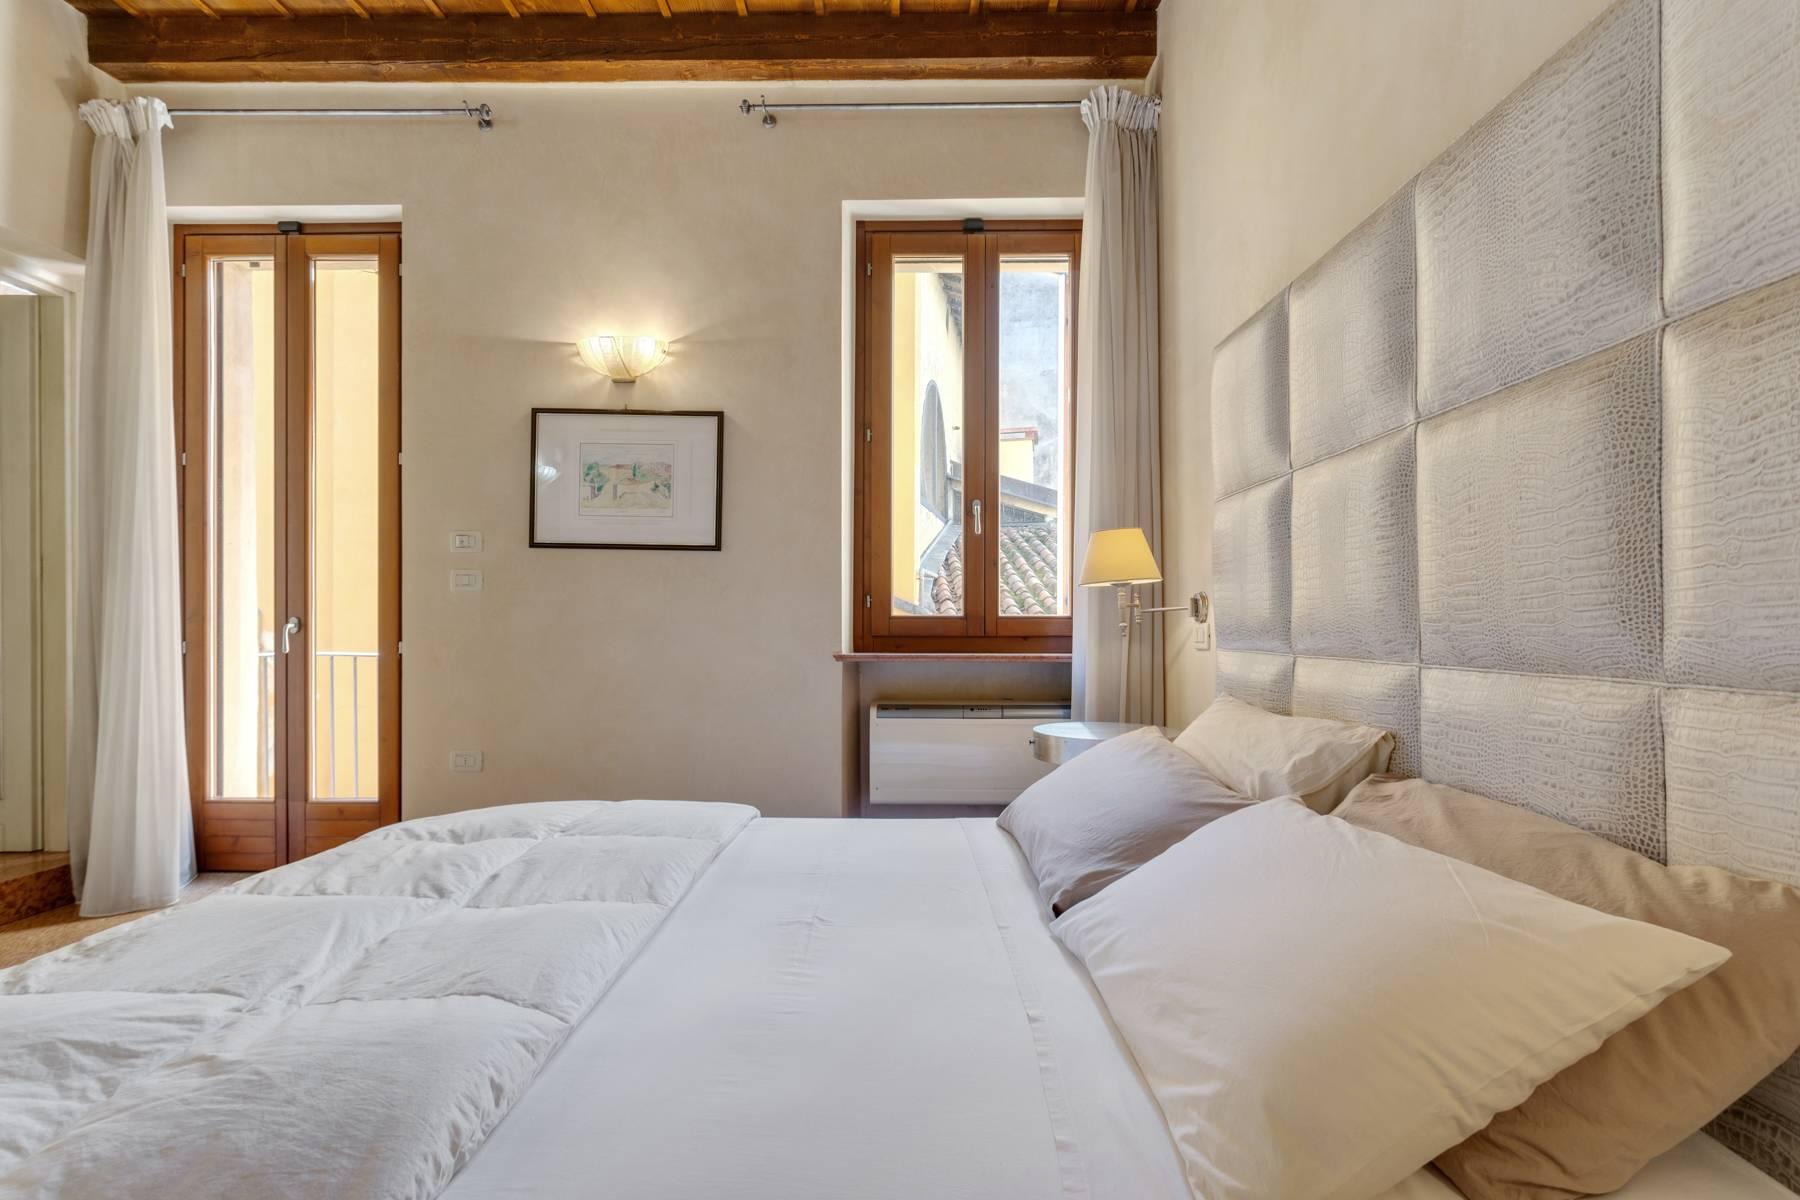 Exquisite apartment just few steps away from Piazza delle Erbe - 11